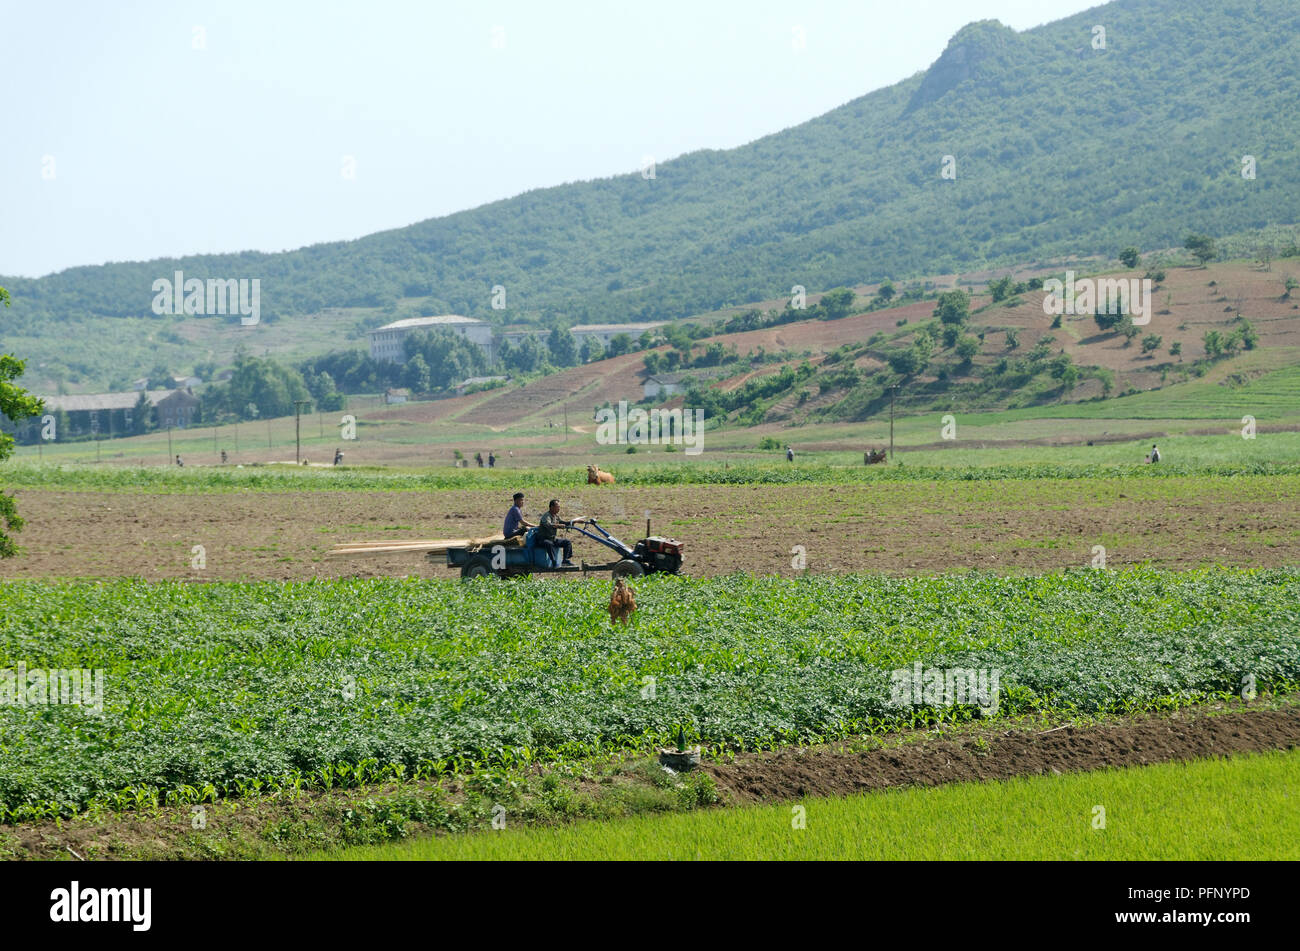 North korea, two men driving a small tractor across a rice field Stock Photo